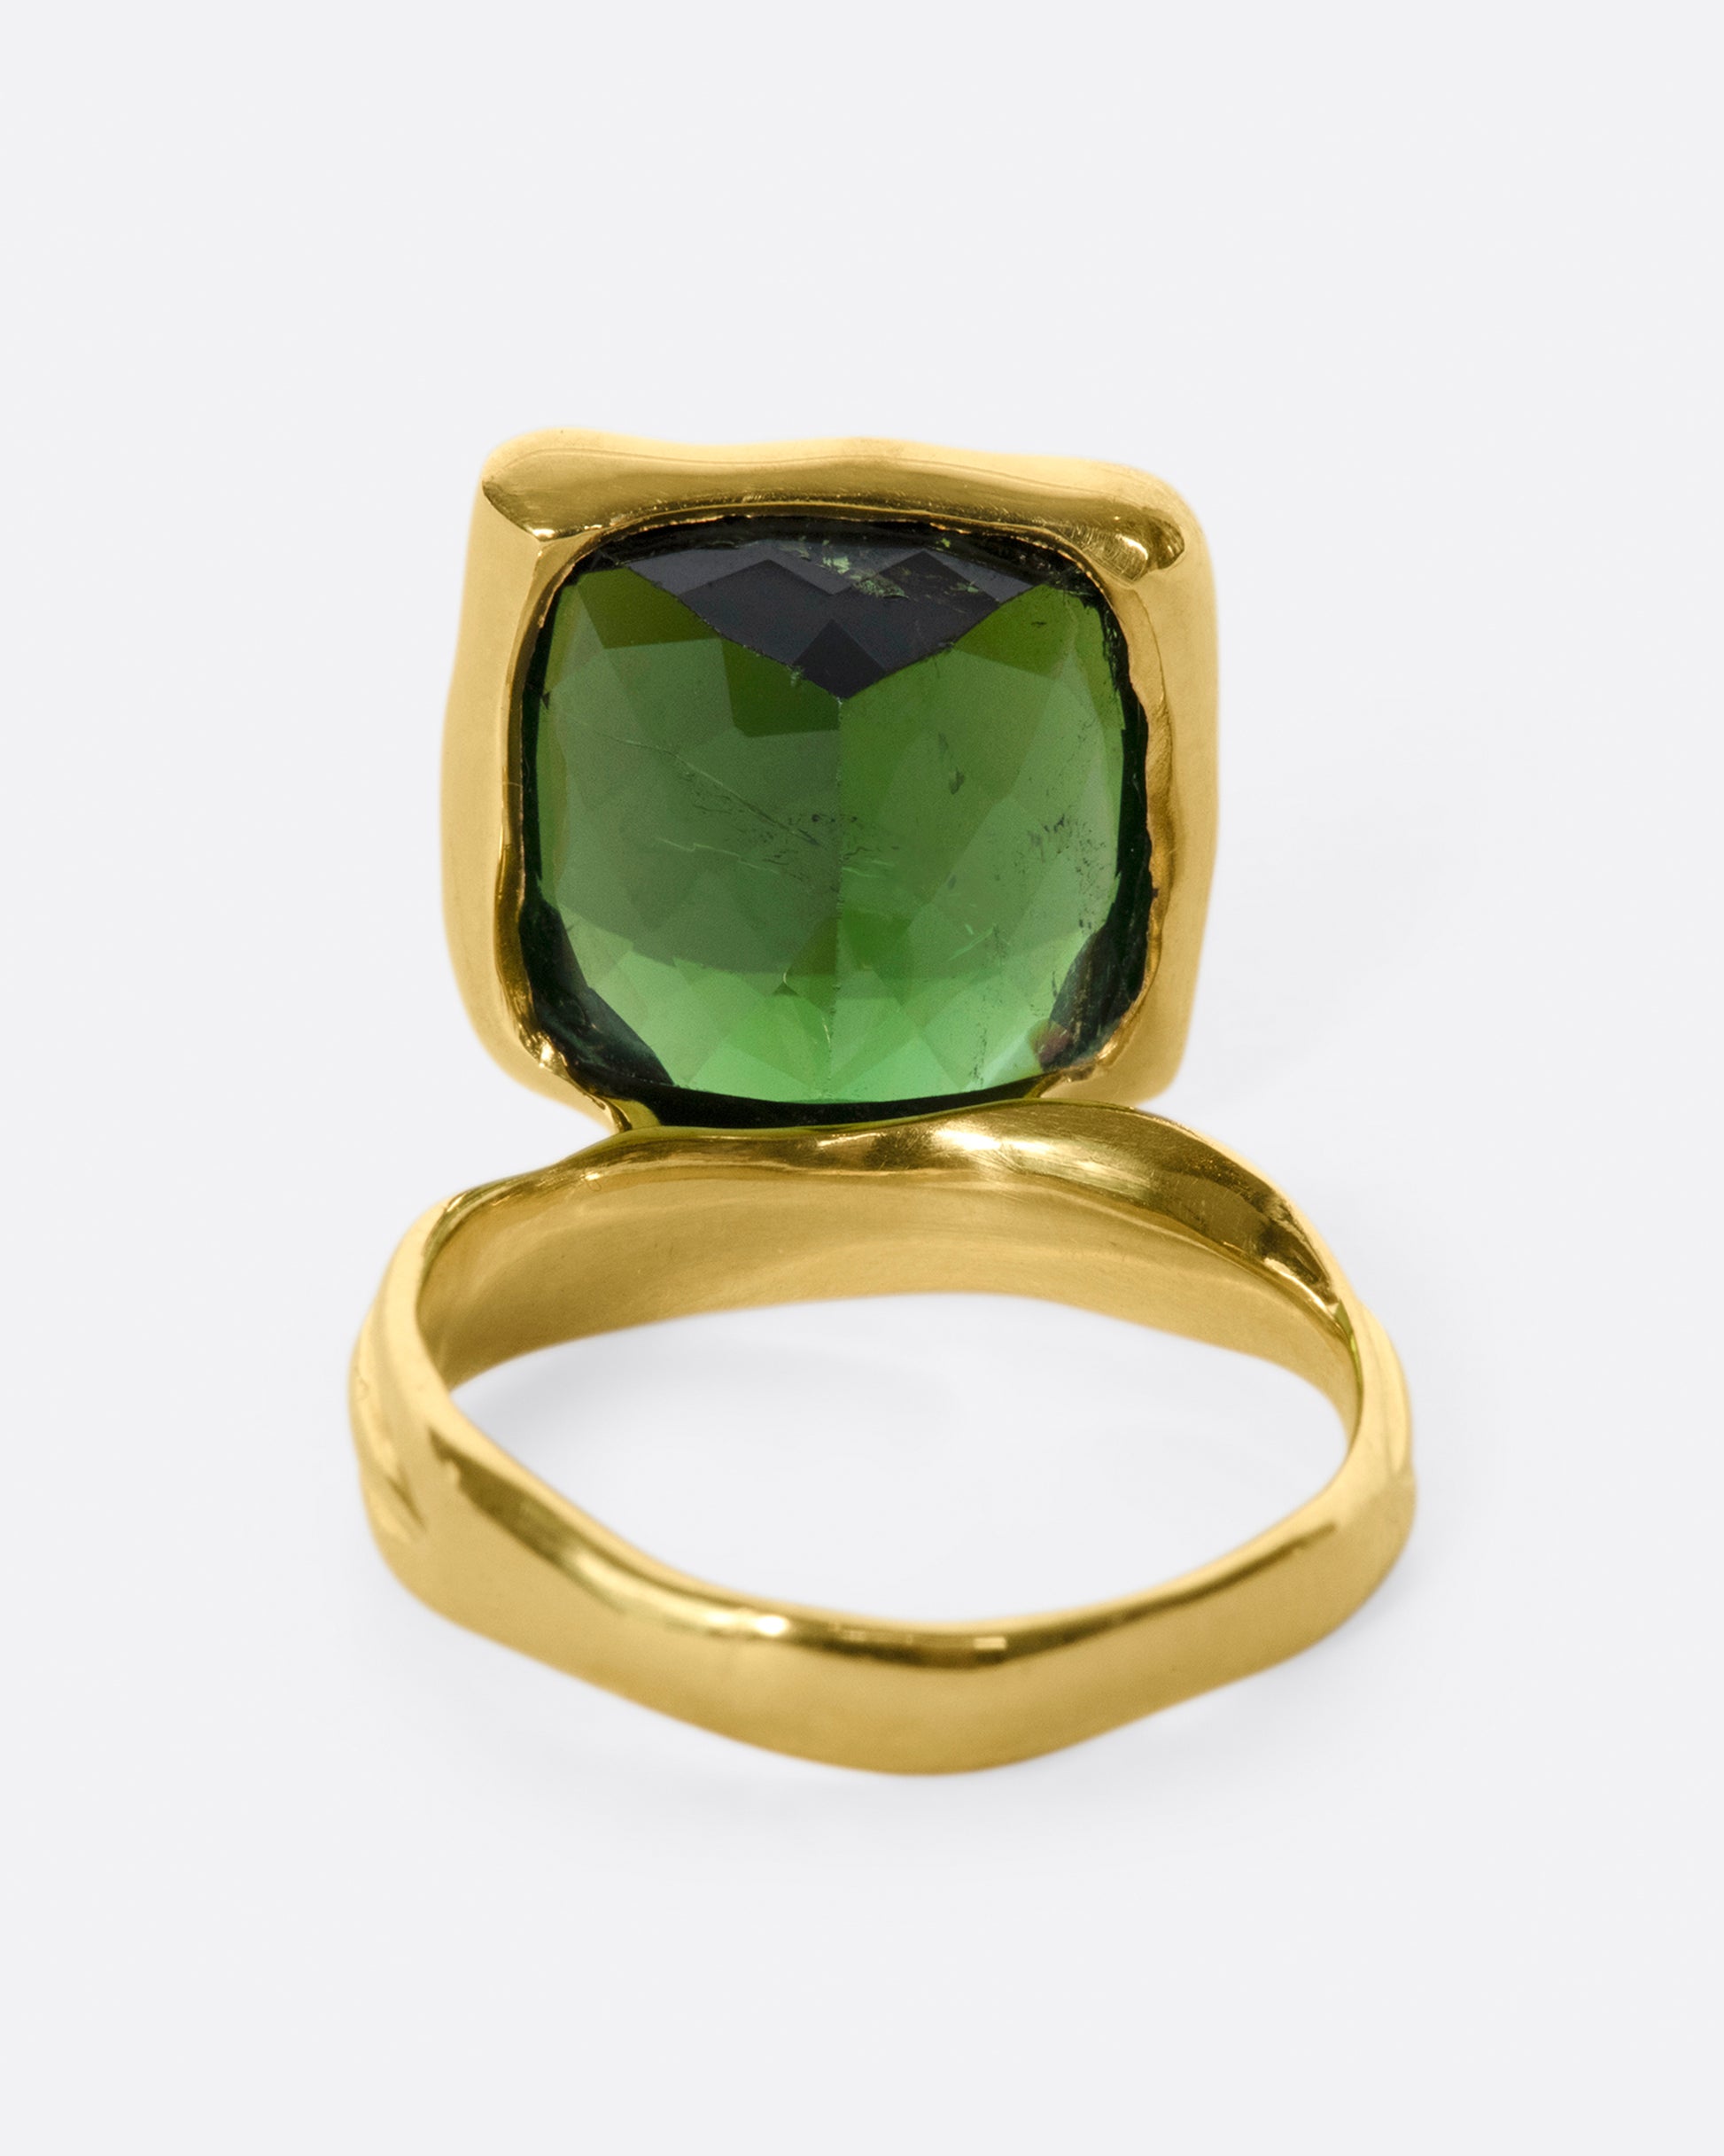 This ring is designed to showcase the tourmaline; the band is set off to one side and the setting is raised to allow for maximum light to pass through the stone.